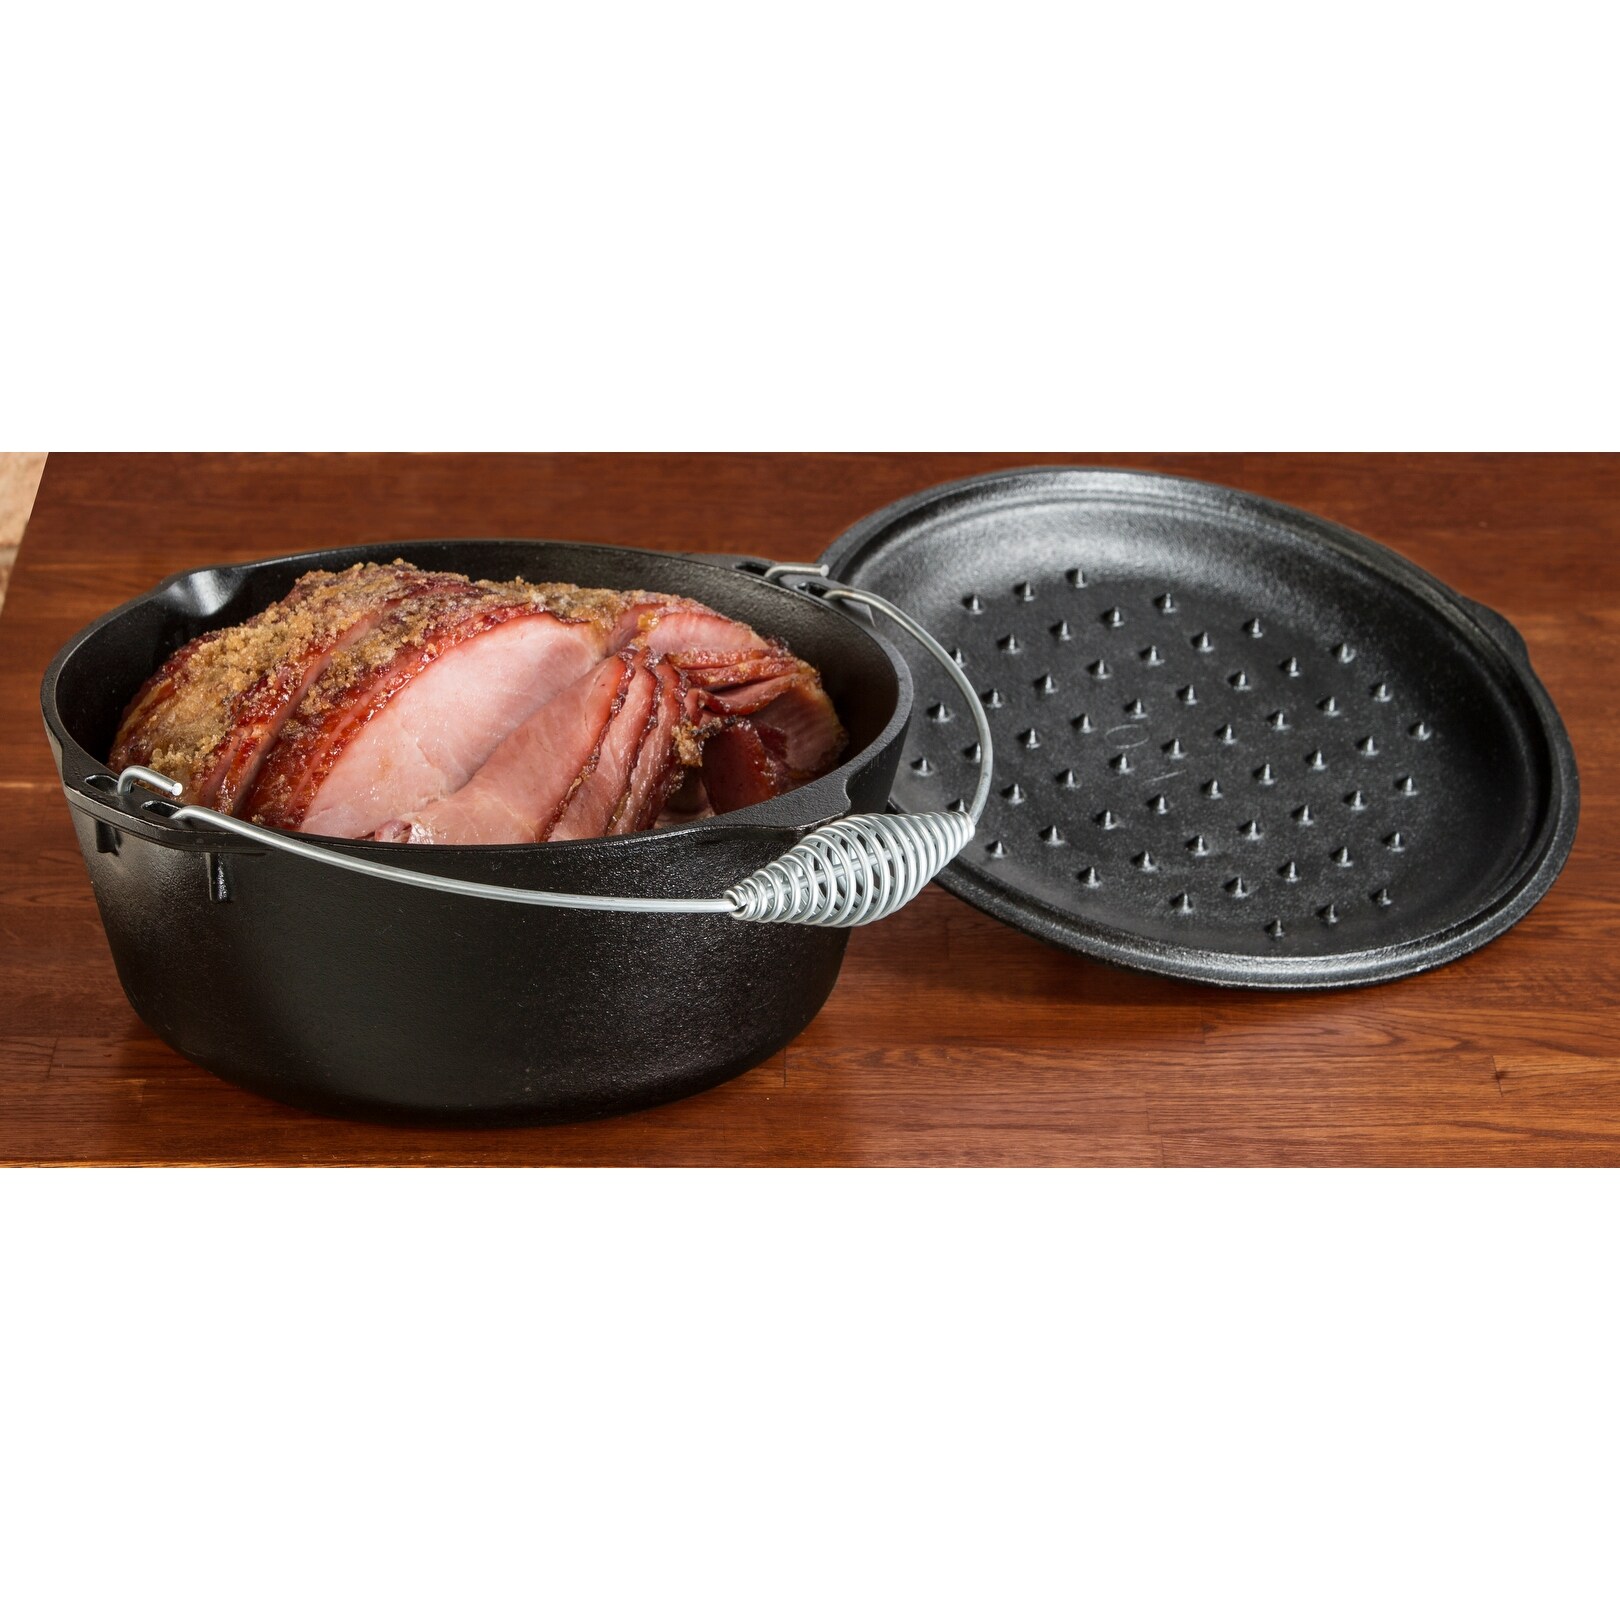 https://ak1.ostkcdn.com/images/products/is/images/direct/4a2c3a64d96e89fafa2de74e93f74366f777378f/7-Quart-Cast-Iron-Dutch-Oven-with-Iron-Cover-L10DO3.jpg